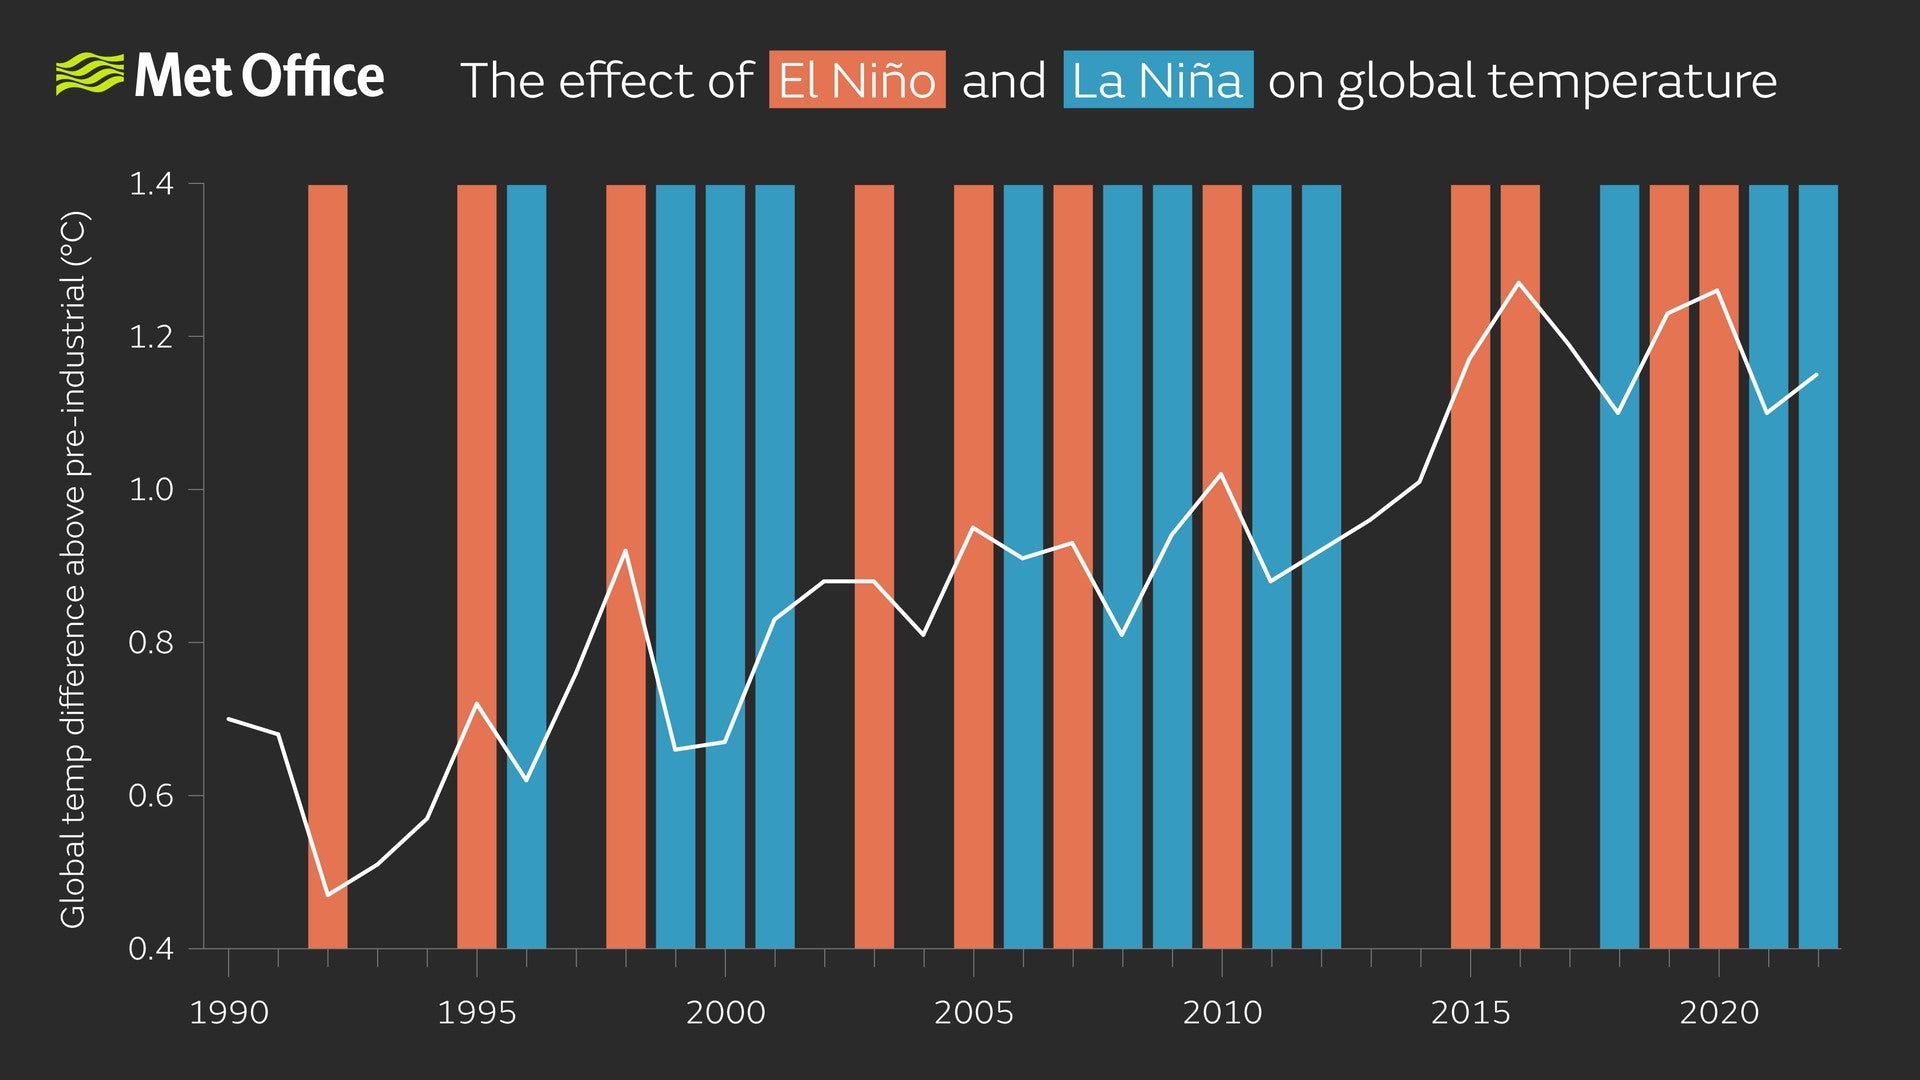 The relative warming or cooling effect of El Nino or La Nina years shown on a graph where the white line is average global temperature